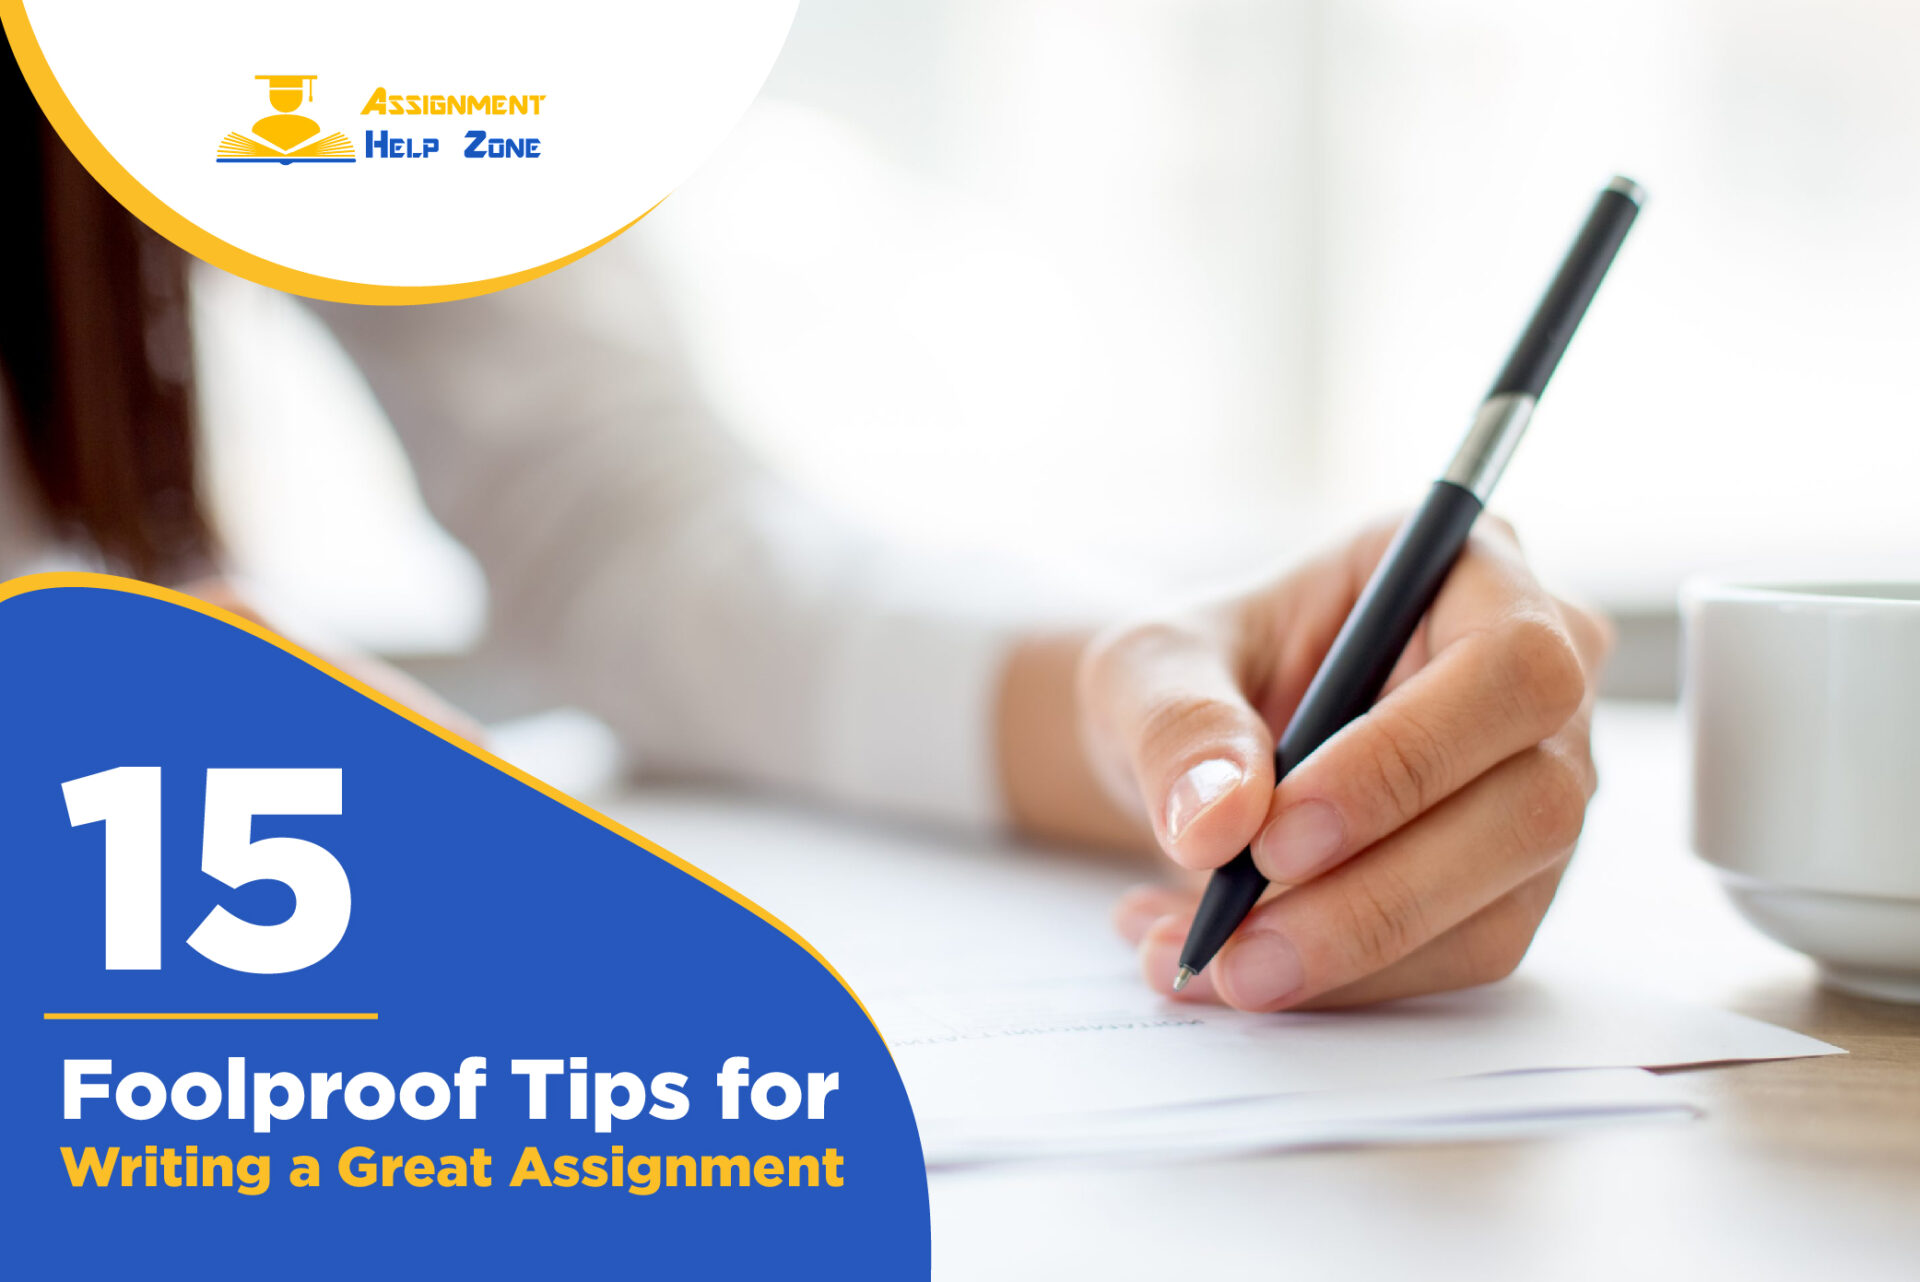 15 Foolproof Tips for Writing a Great Assignment